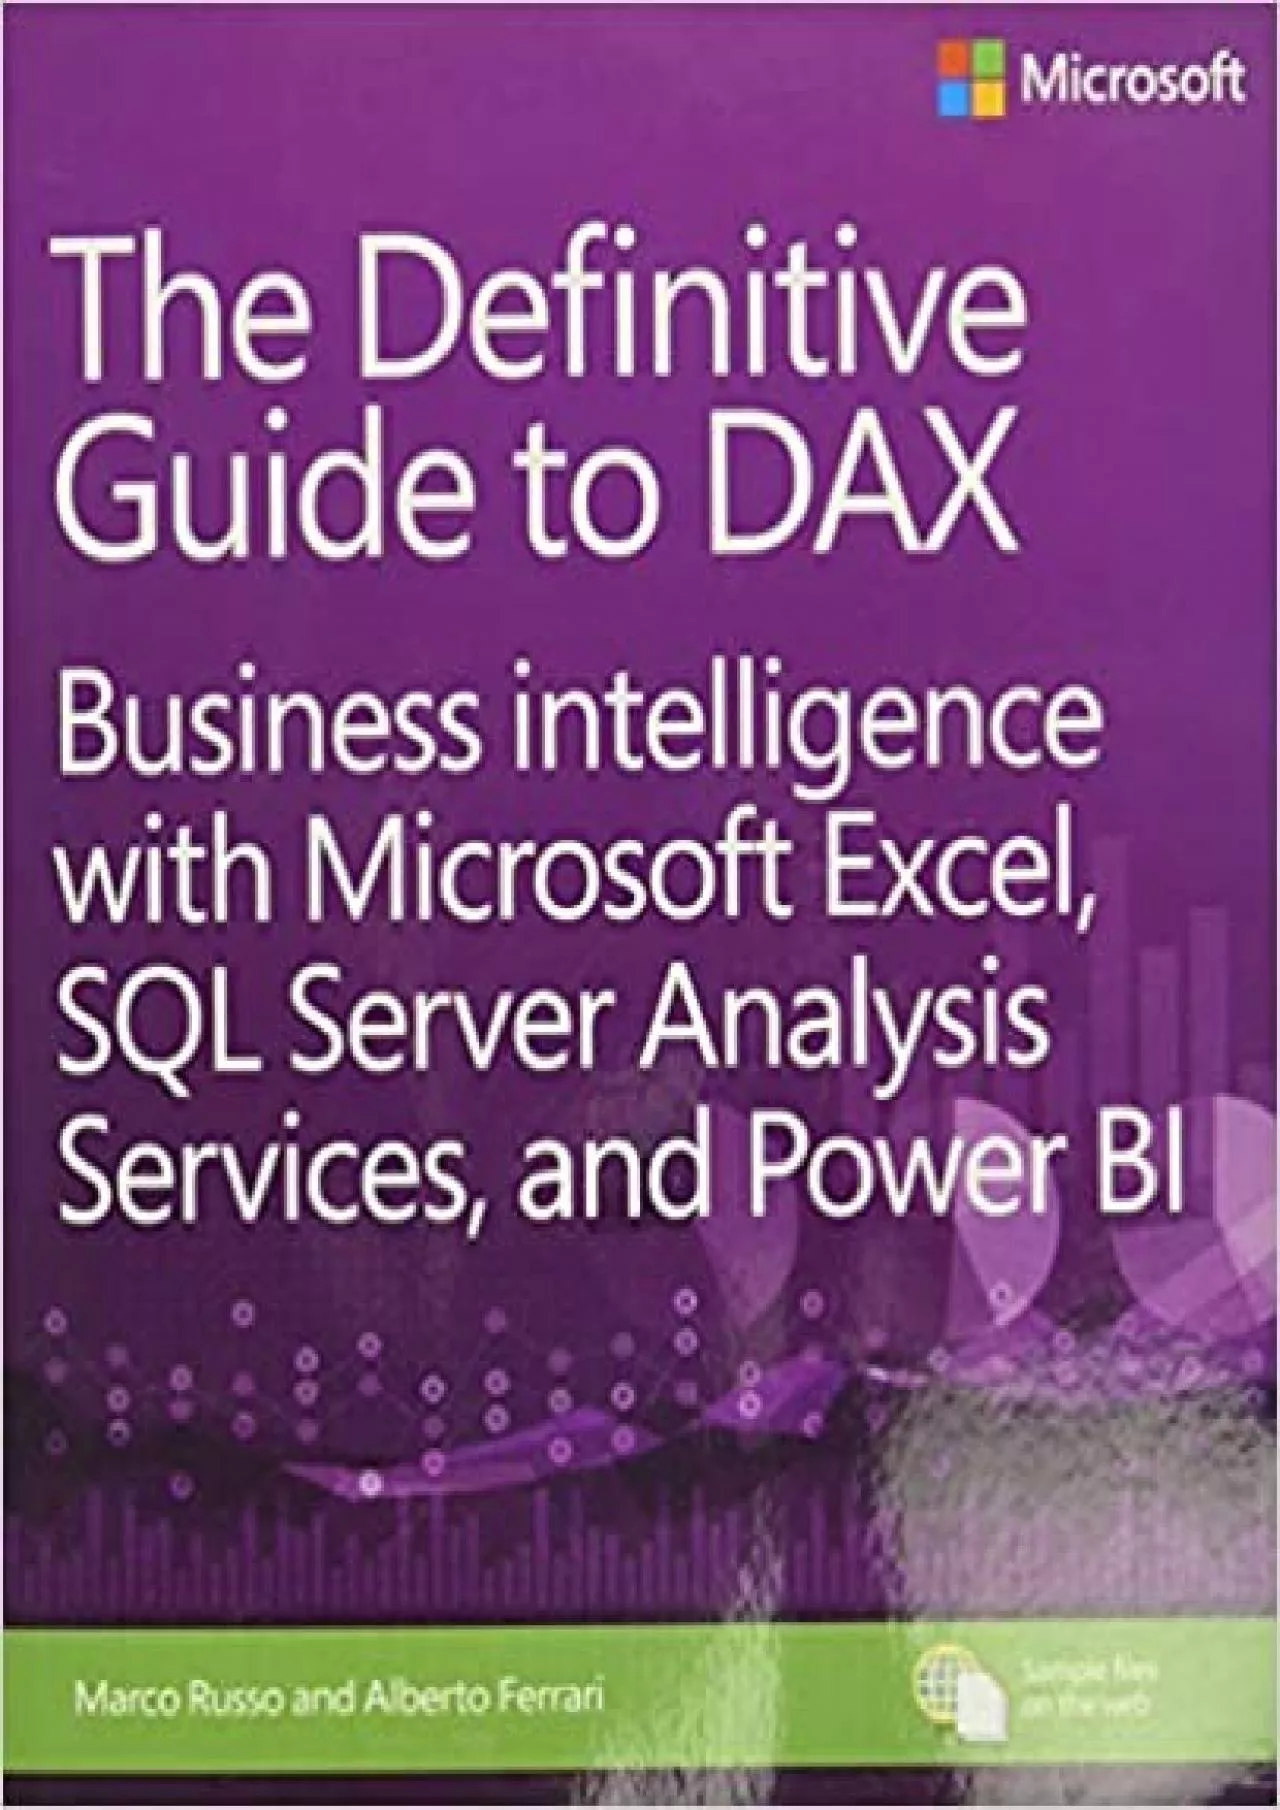 Definitive Guide to DAX, The: Business intelligence with Microsoft Excel, SQL Server Analysis